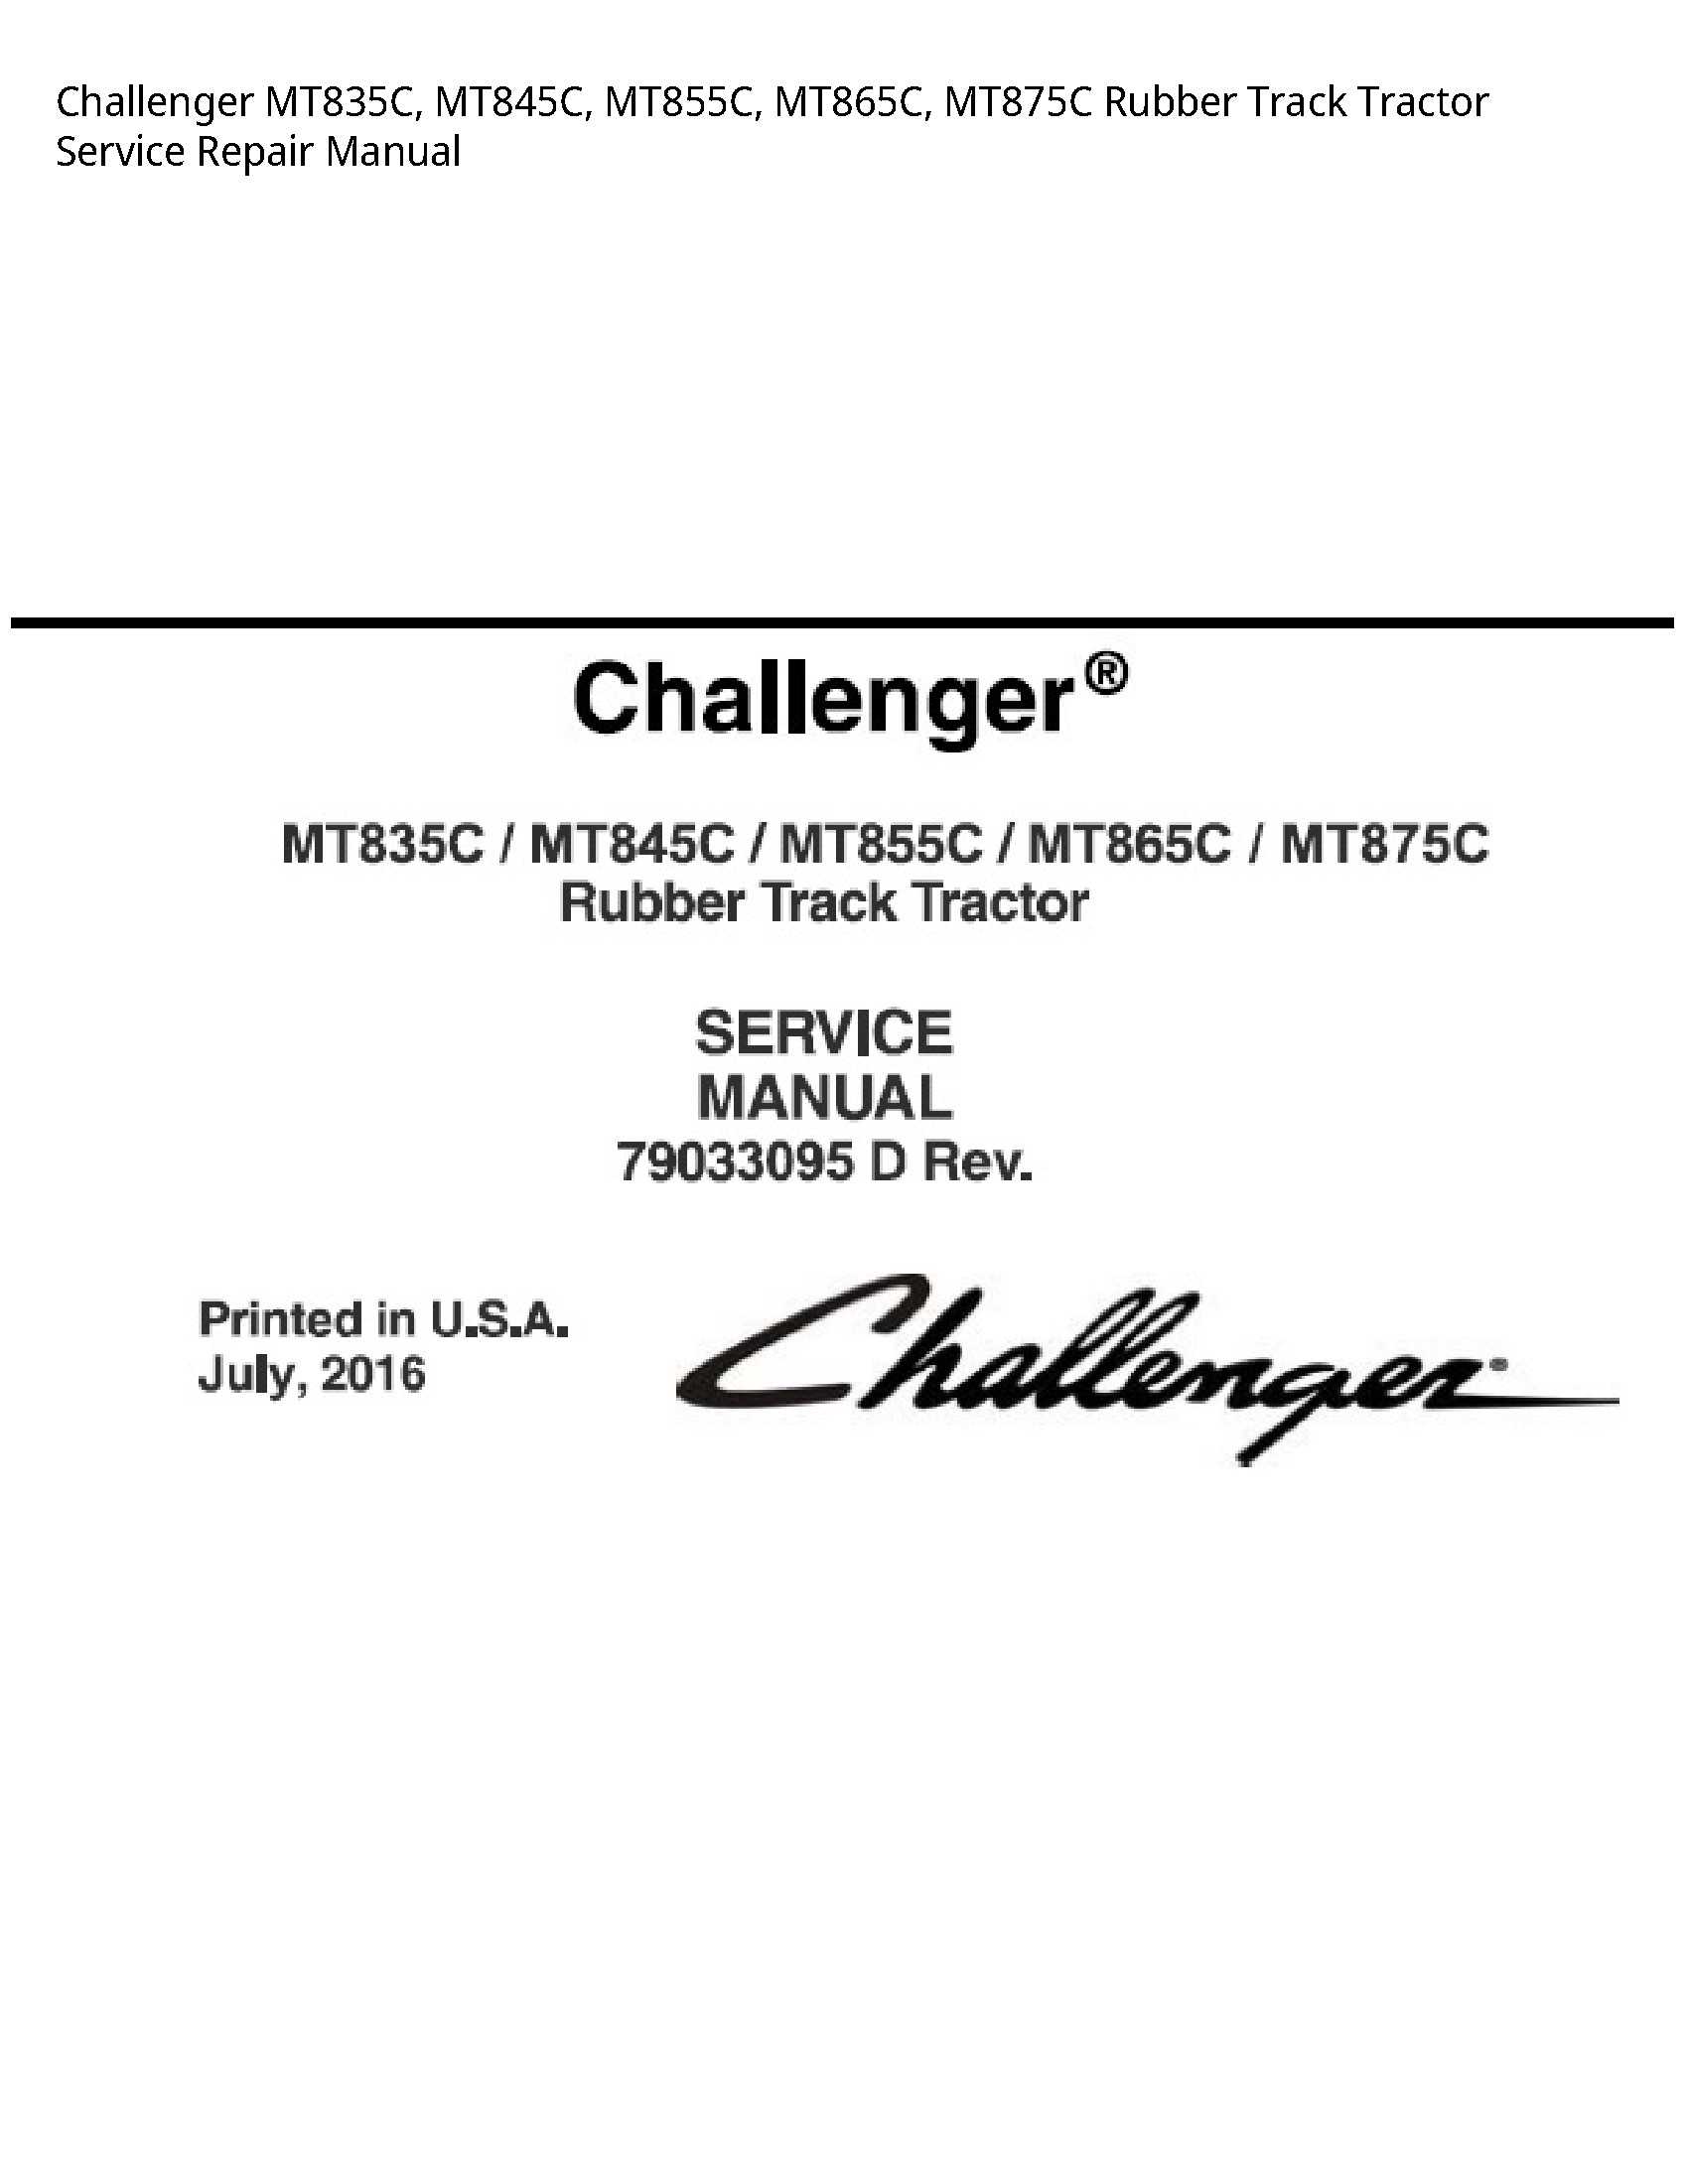 Challenger MT835C Rubber Track Tractor manual